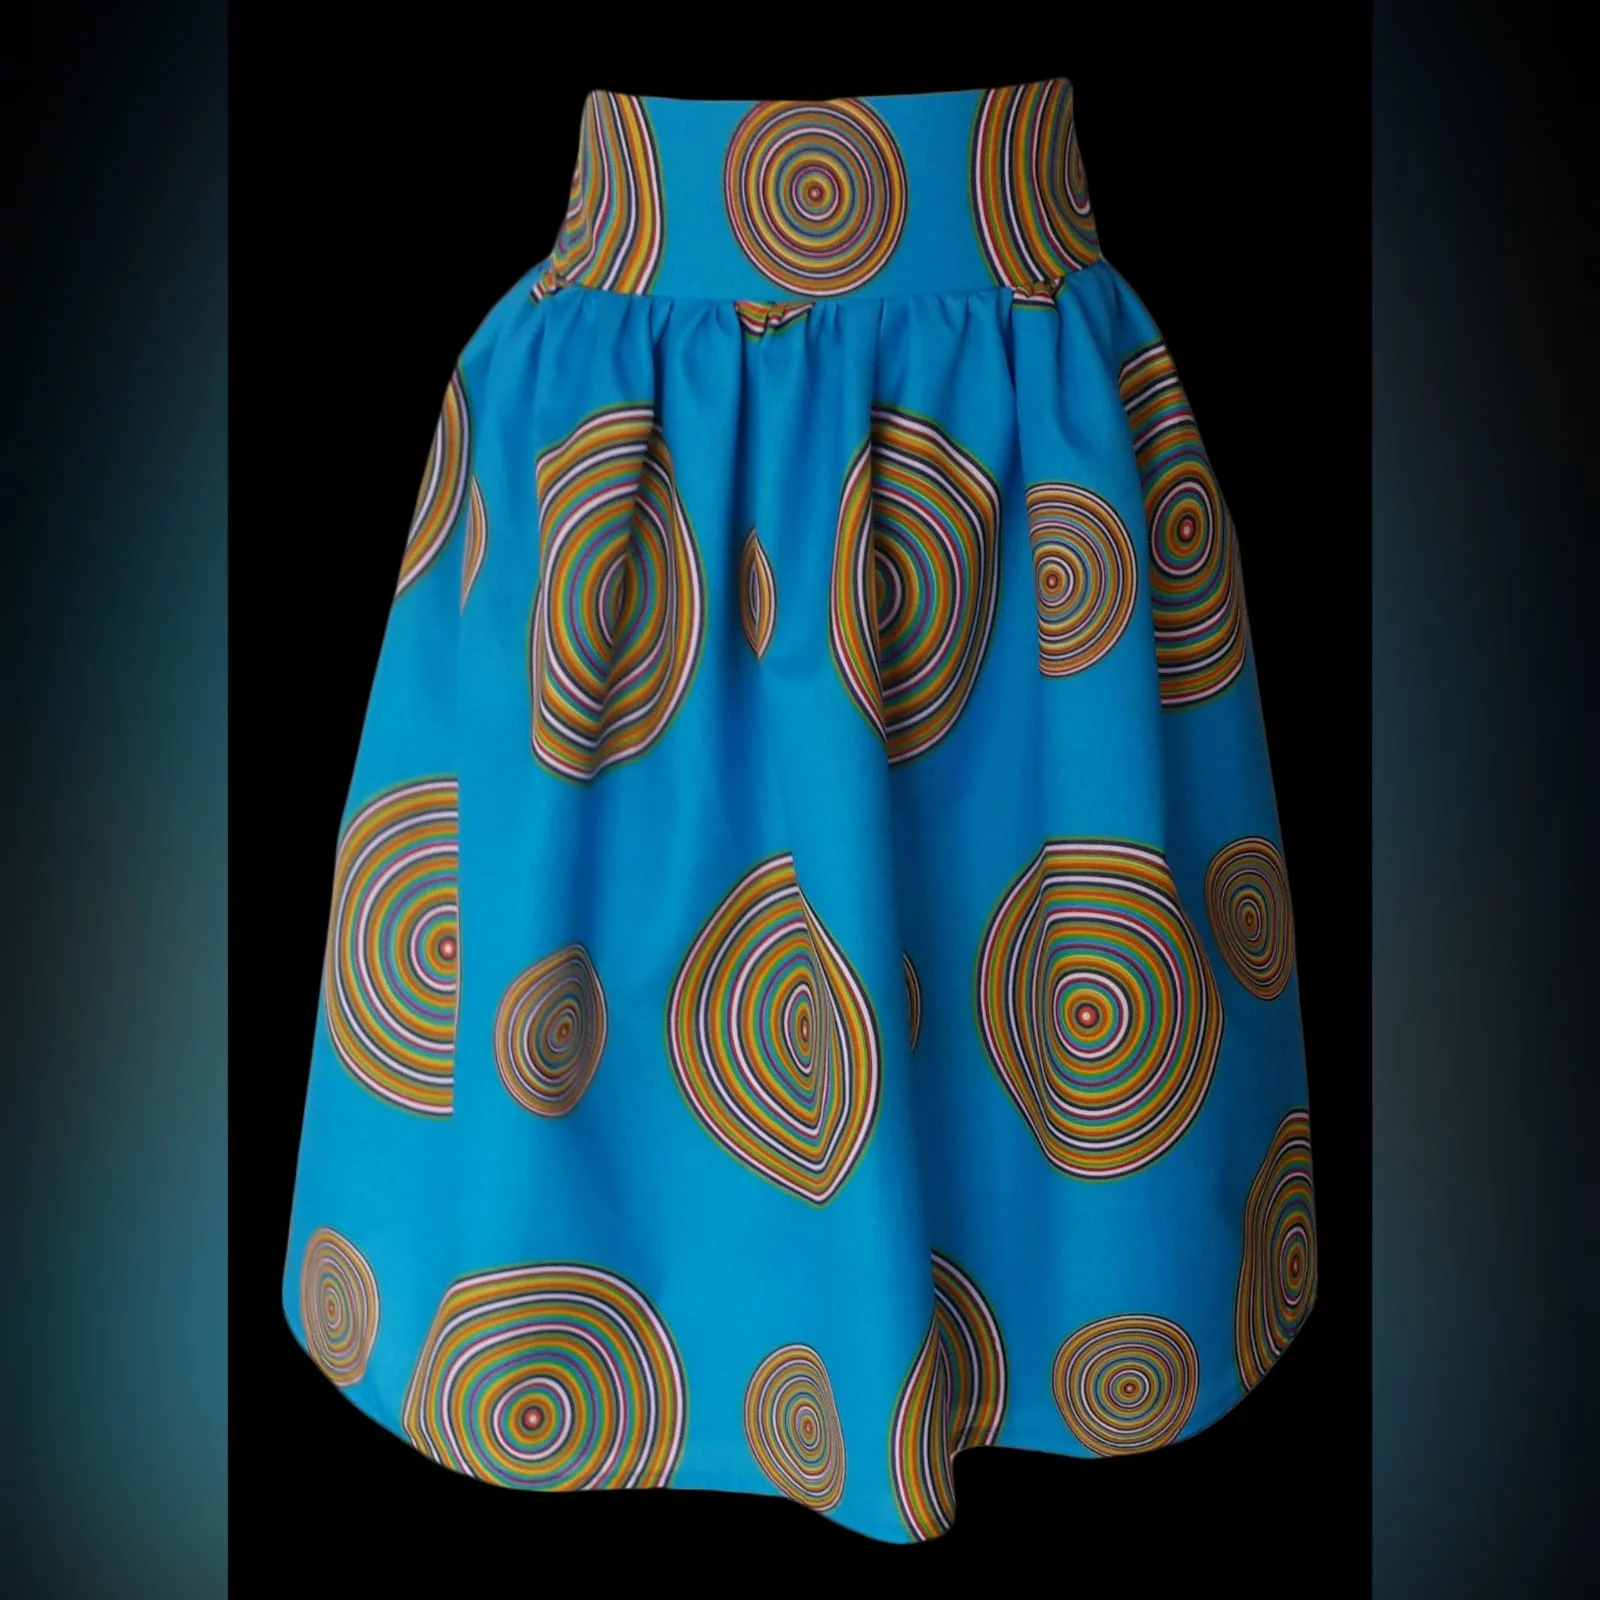 Matching venda traditional outfits for the family 5 venda traditional matching family items. Ladies high waisted skirt and girls matching skirt. With men's matching shirt.